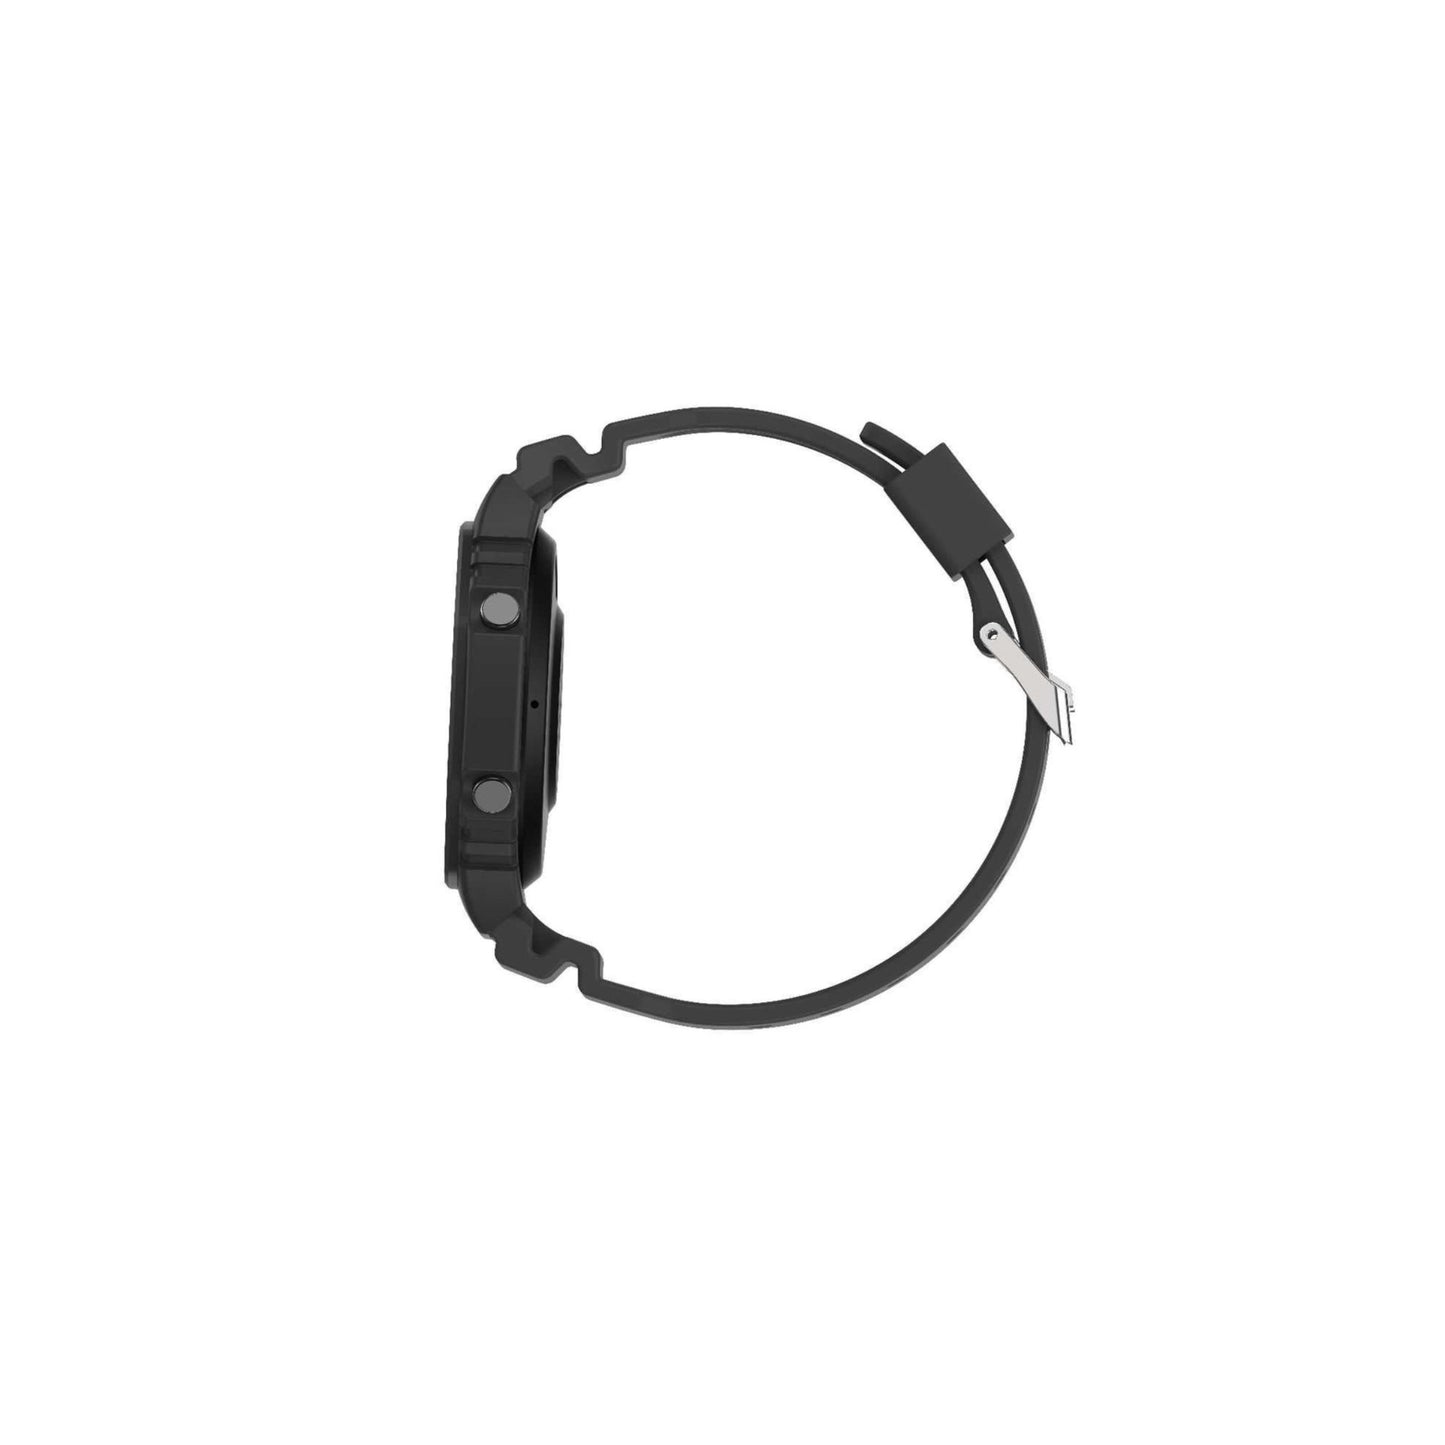 Green Lion G-Sports Smart Watches with 230mAh,IOS 9.0 + Android 5.0_Black